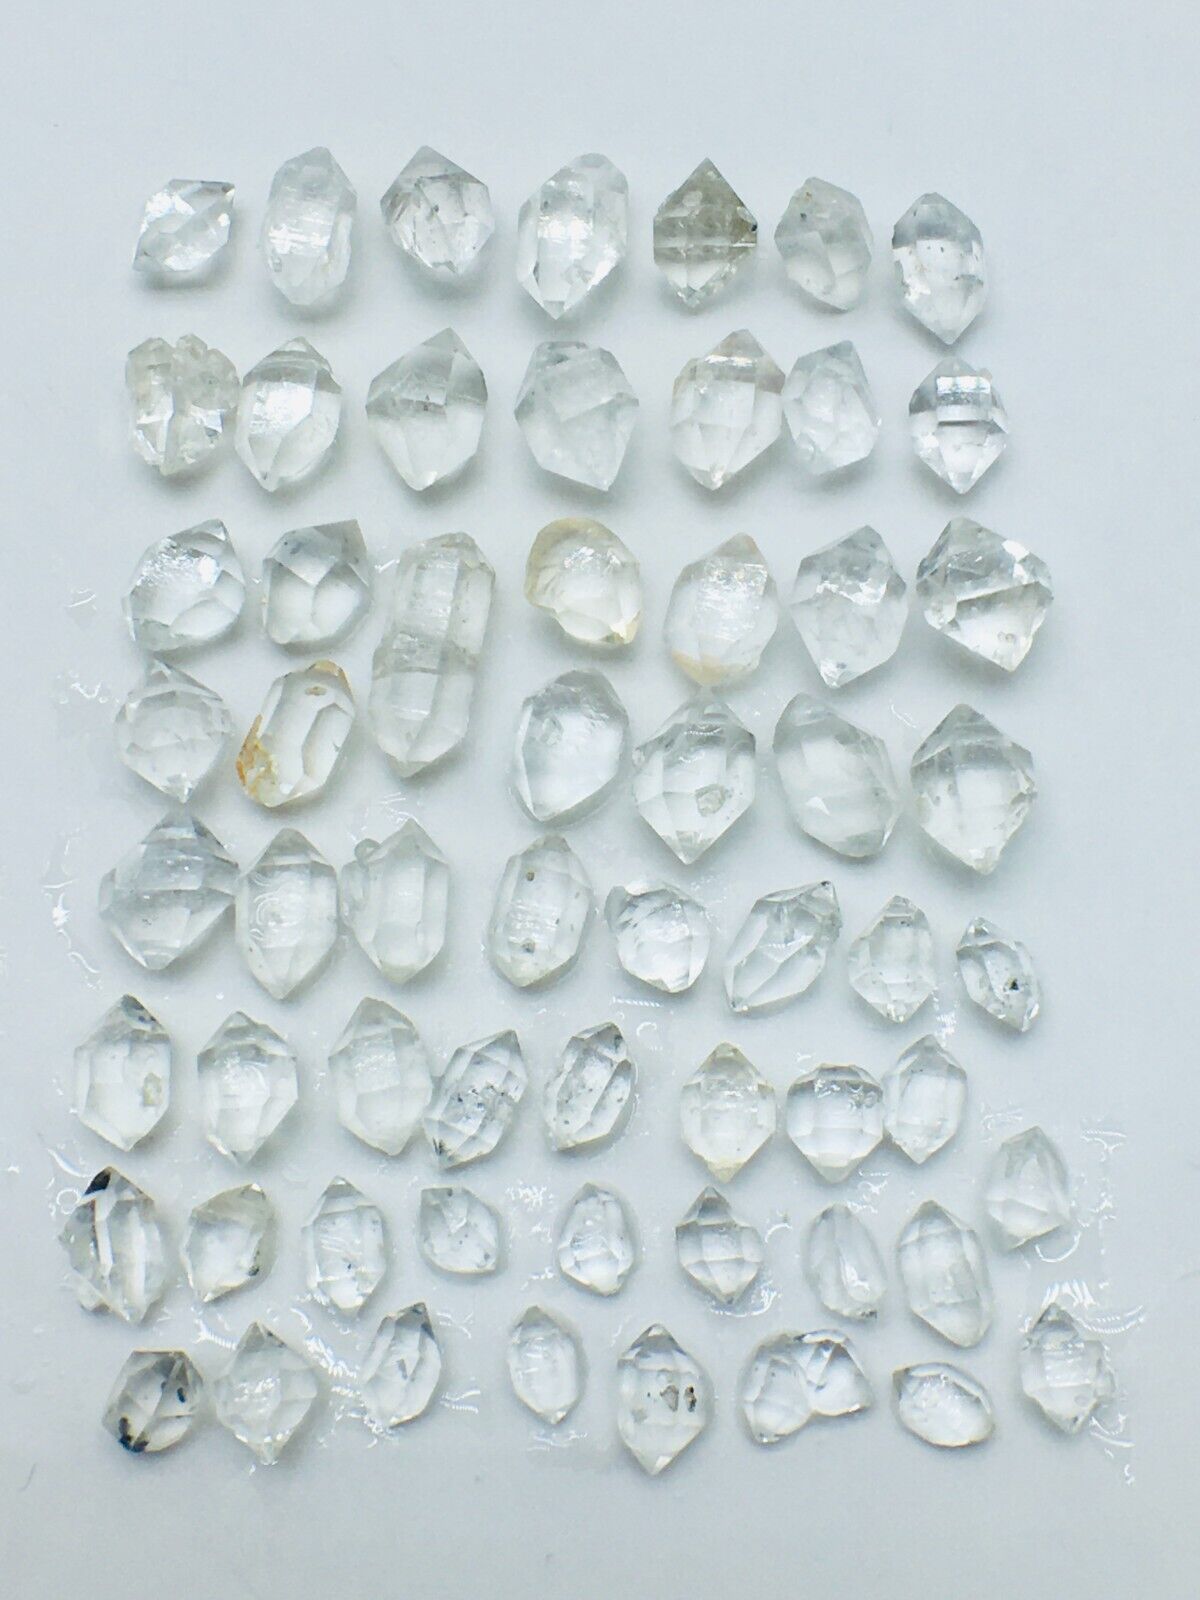 60pc Herkimer Diamond AAA small 5mm to 13mm Top gem crystal From-NY 50CT F02